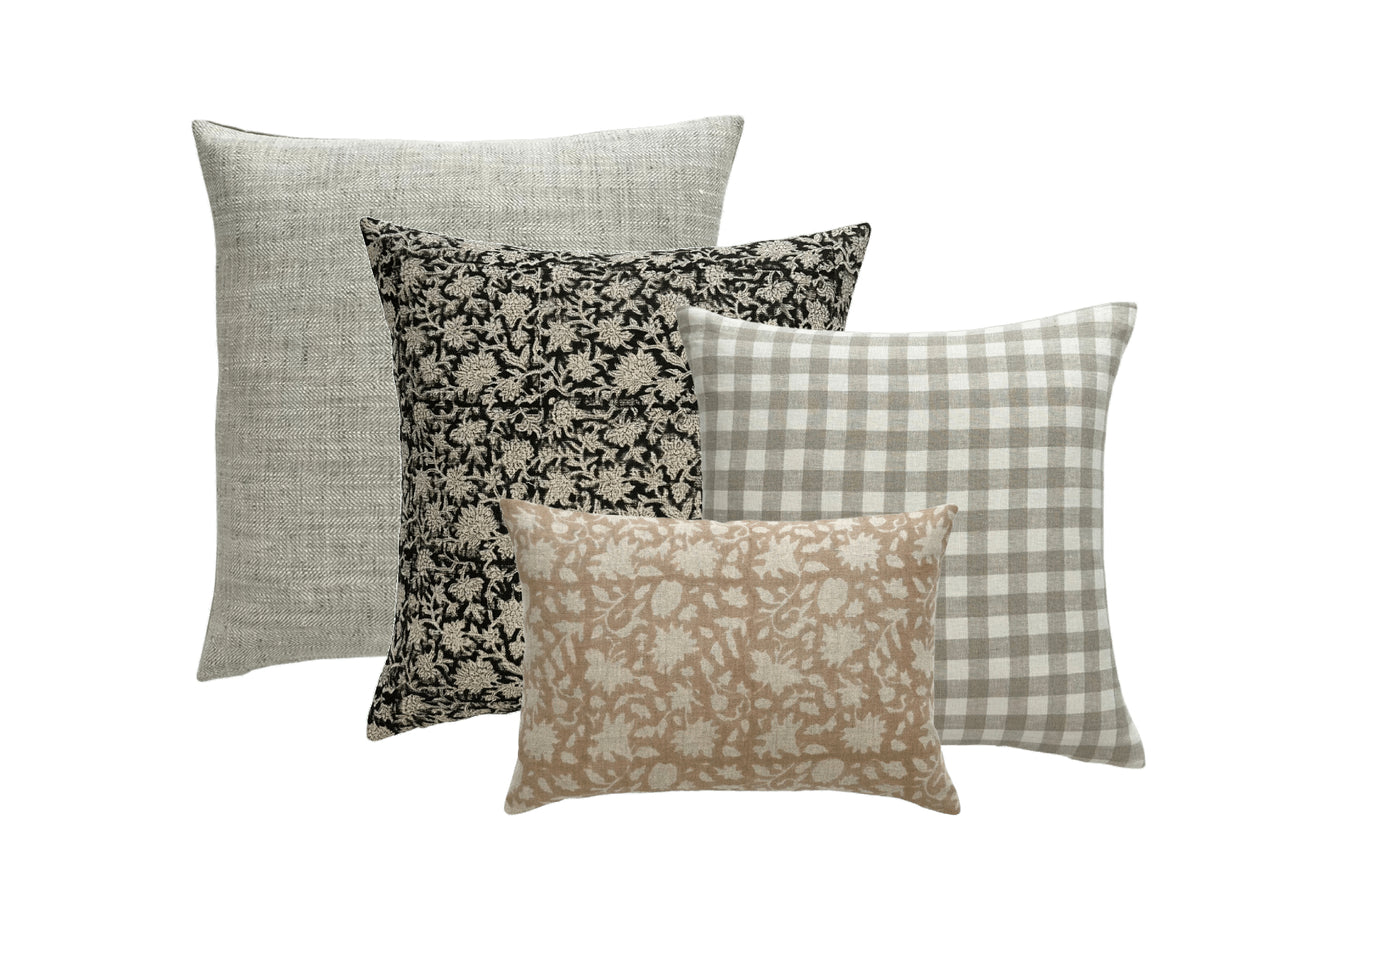 A collection of 4 decorator throw pillows with different colors and patterns.